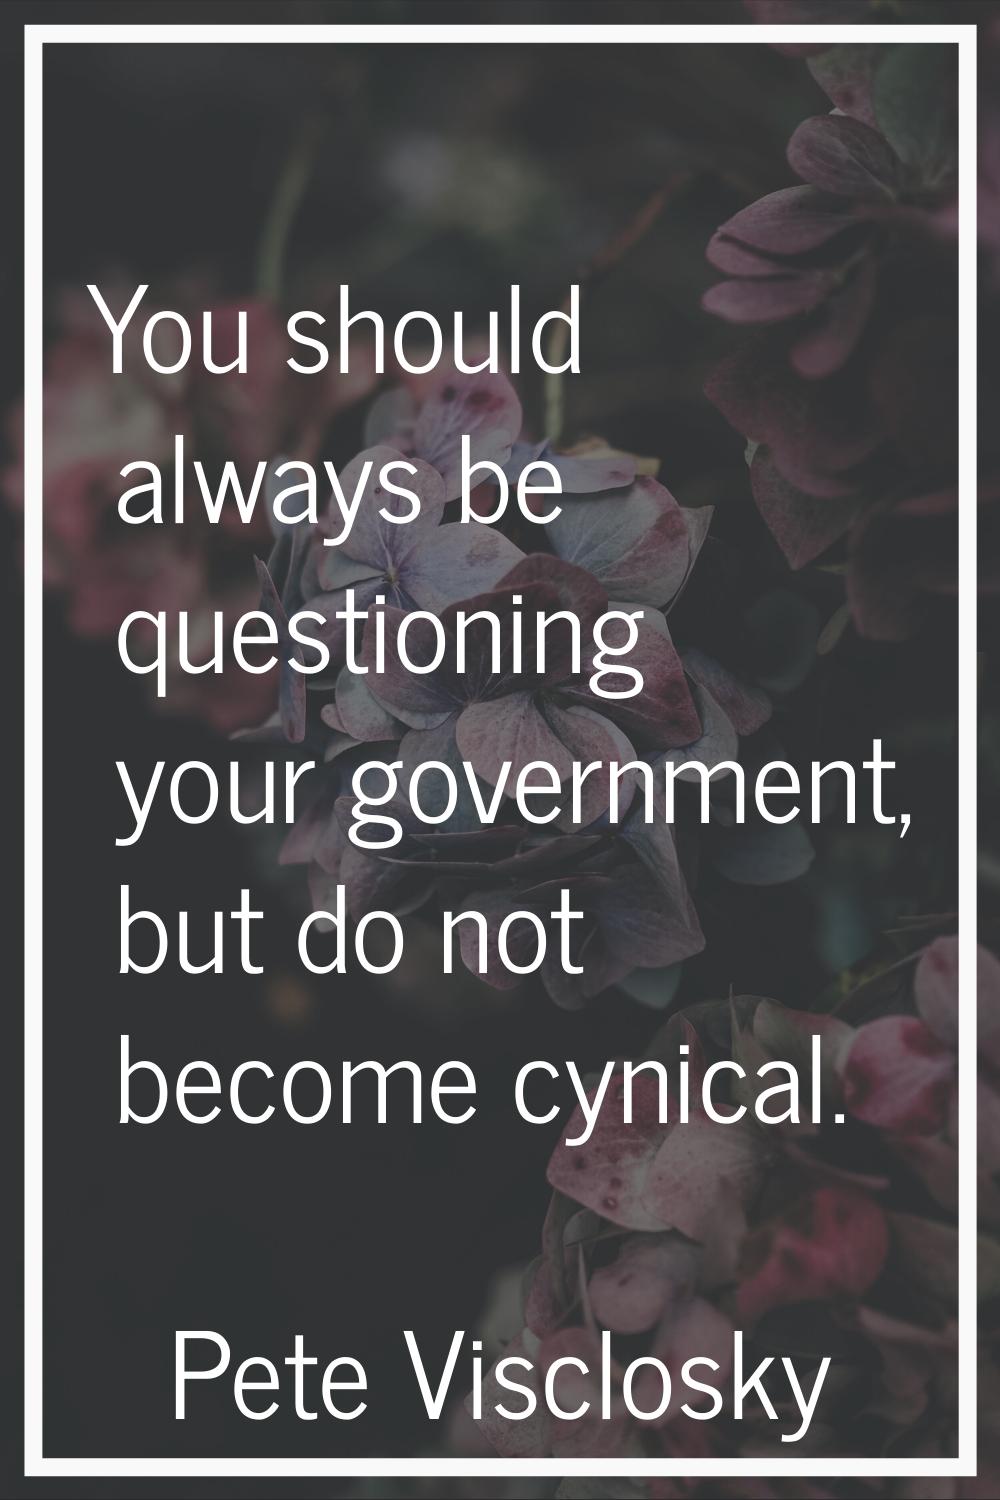 You should always be questioning your government, but do not become cynical.